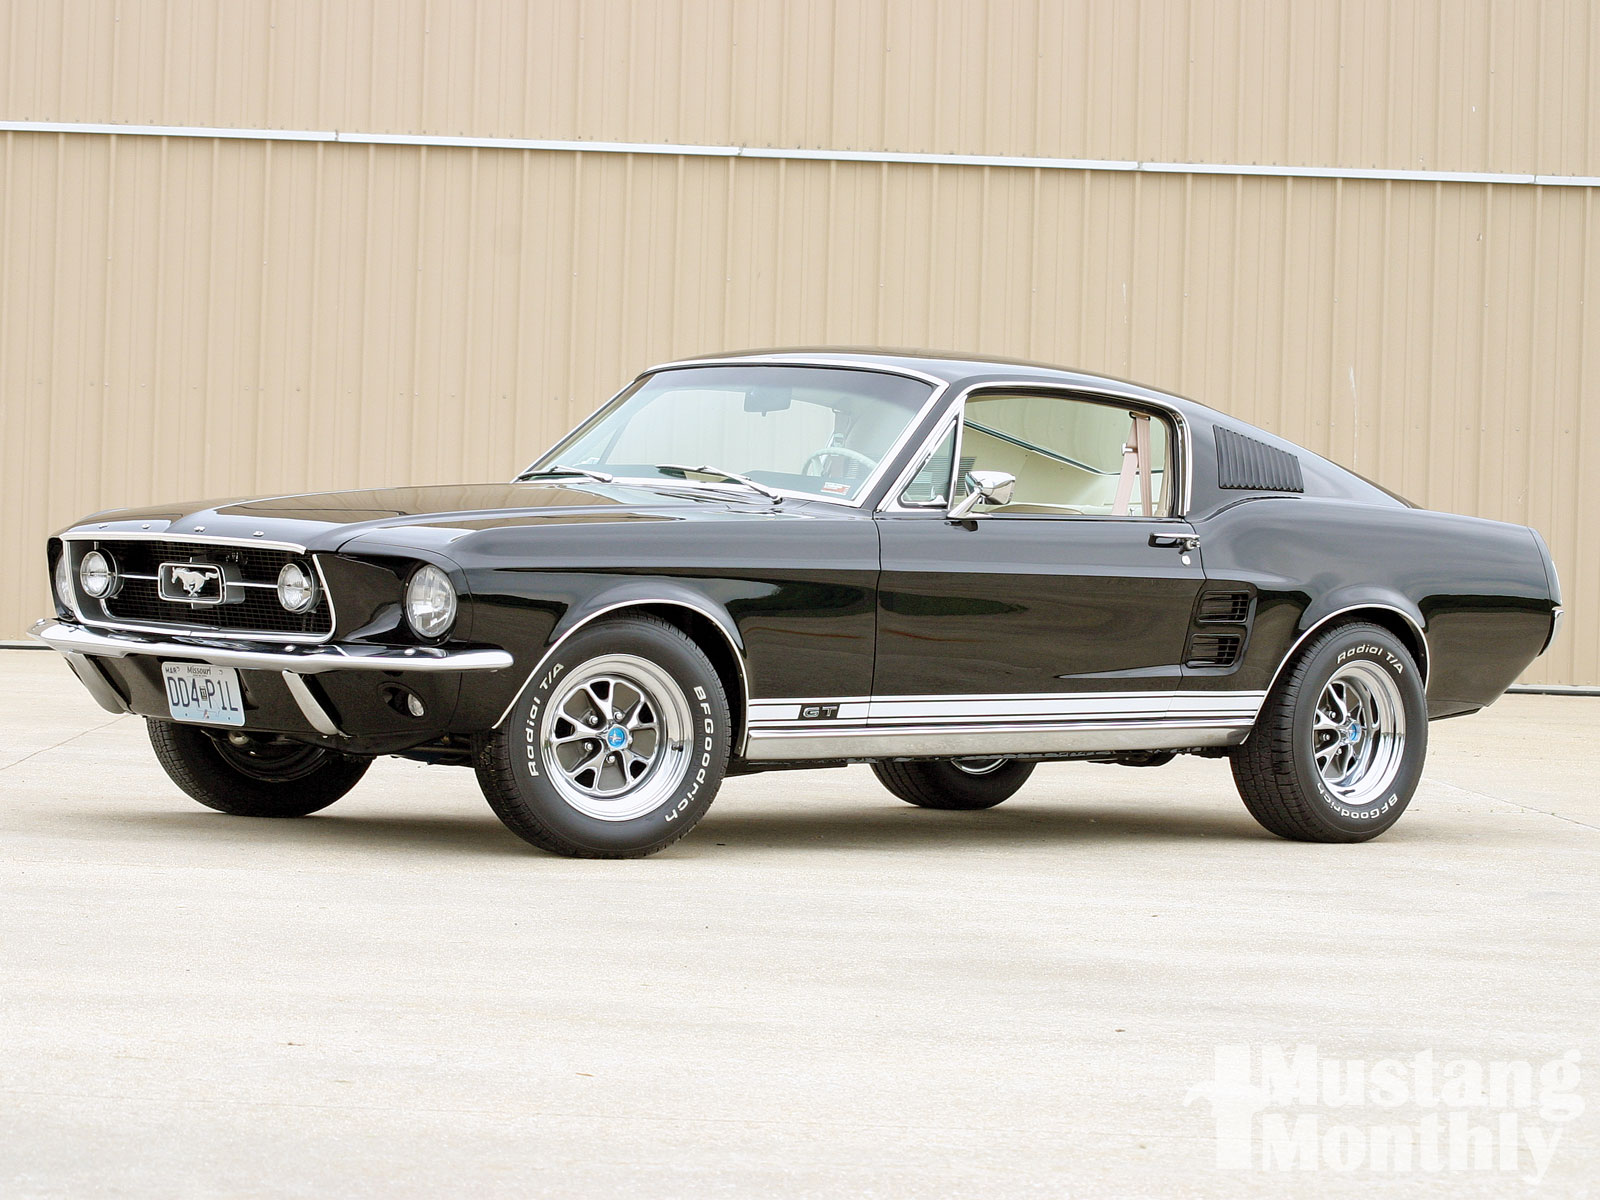 1967 Ford Mustang Fastback Information Images